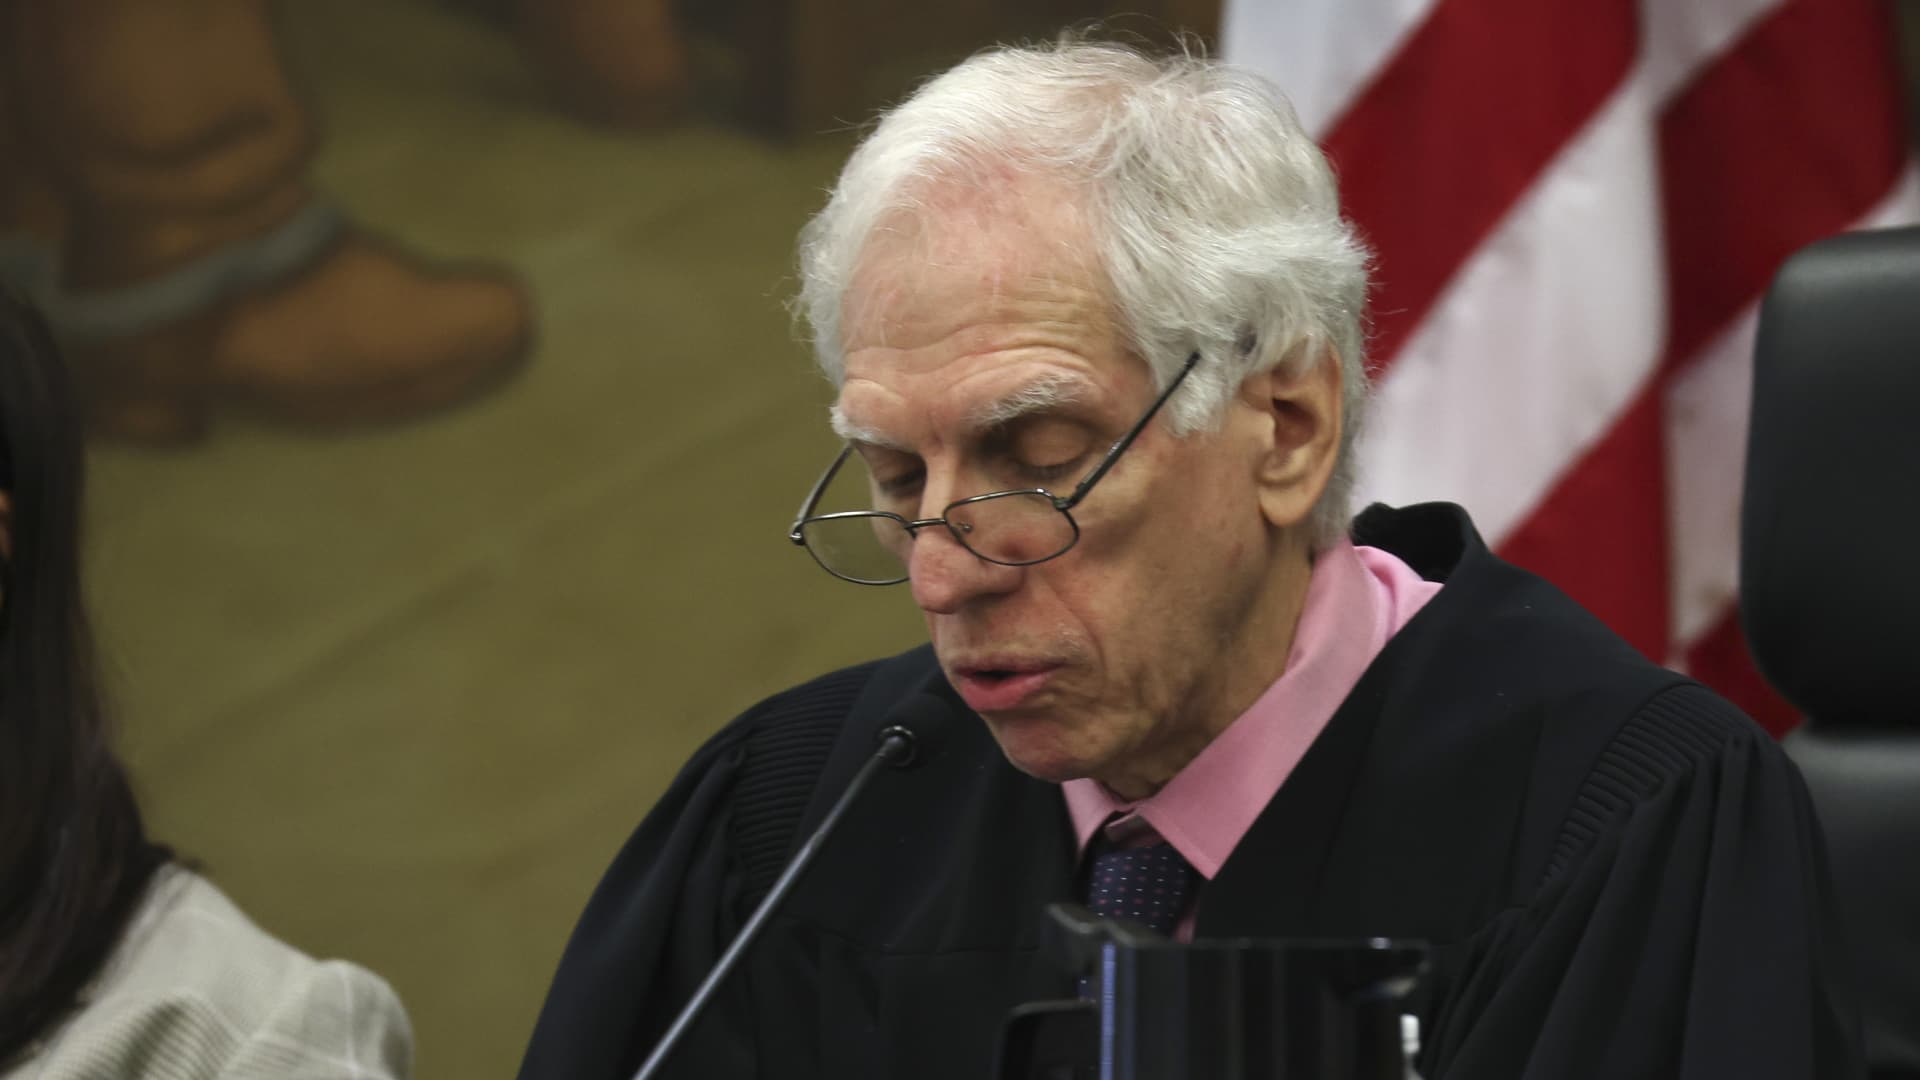 Justice Arthur Engoron speaks during the trial of former U.S. President Donald Trump for Trump's civil fraud trial at New York State Supreme Court on October 03, 2023 in New York City.